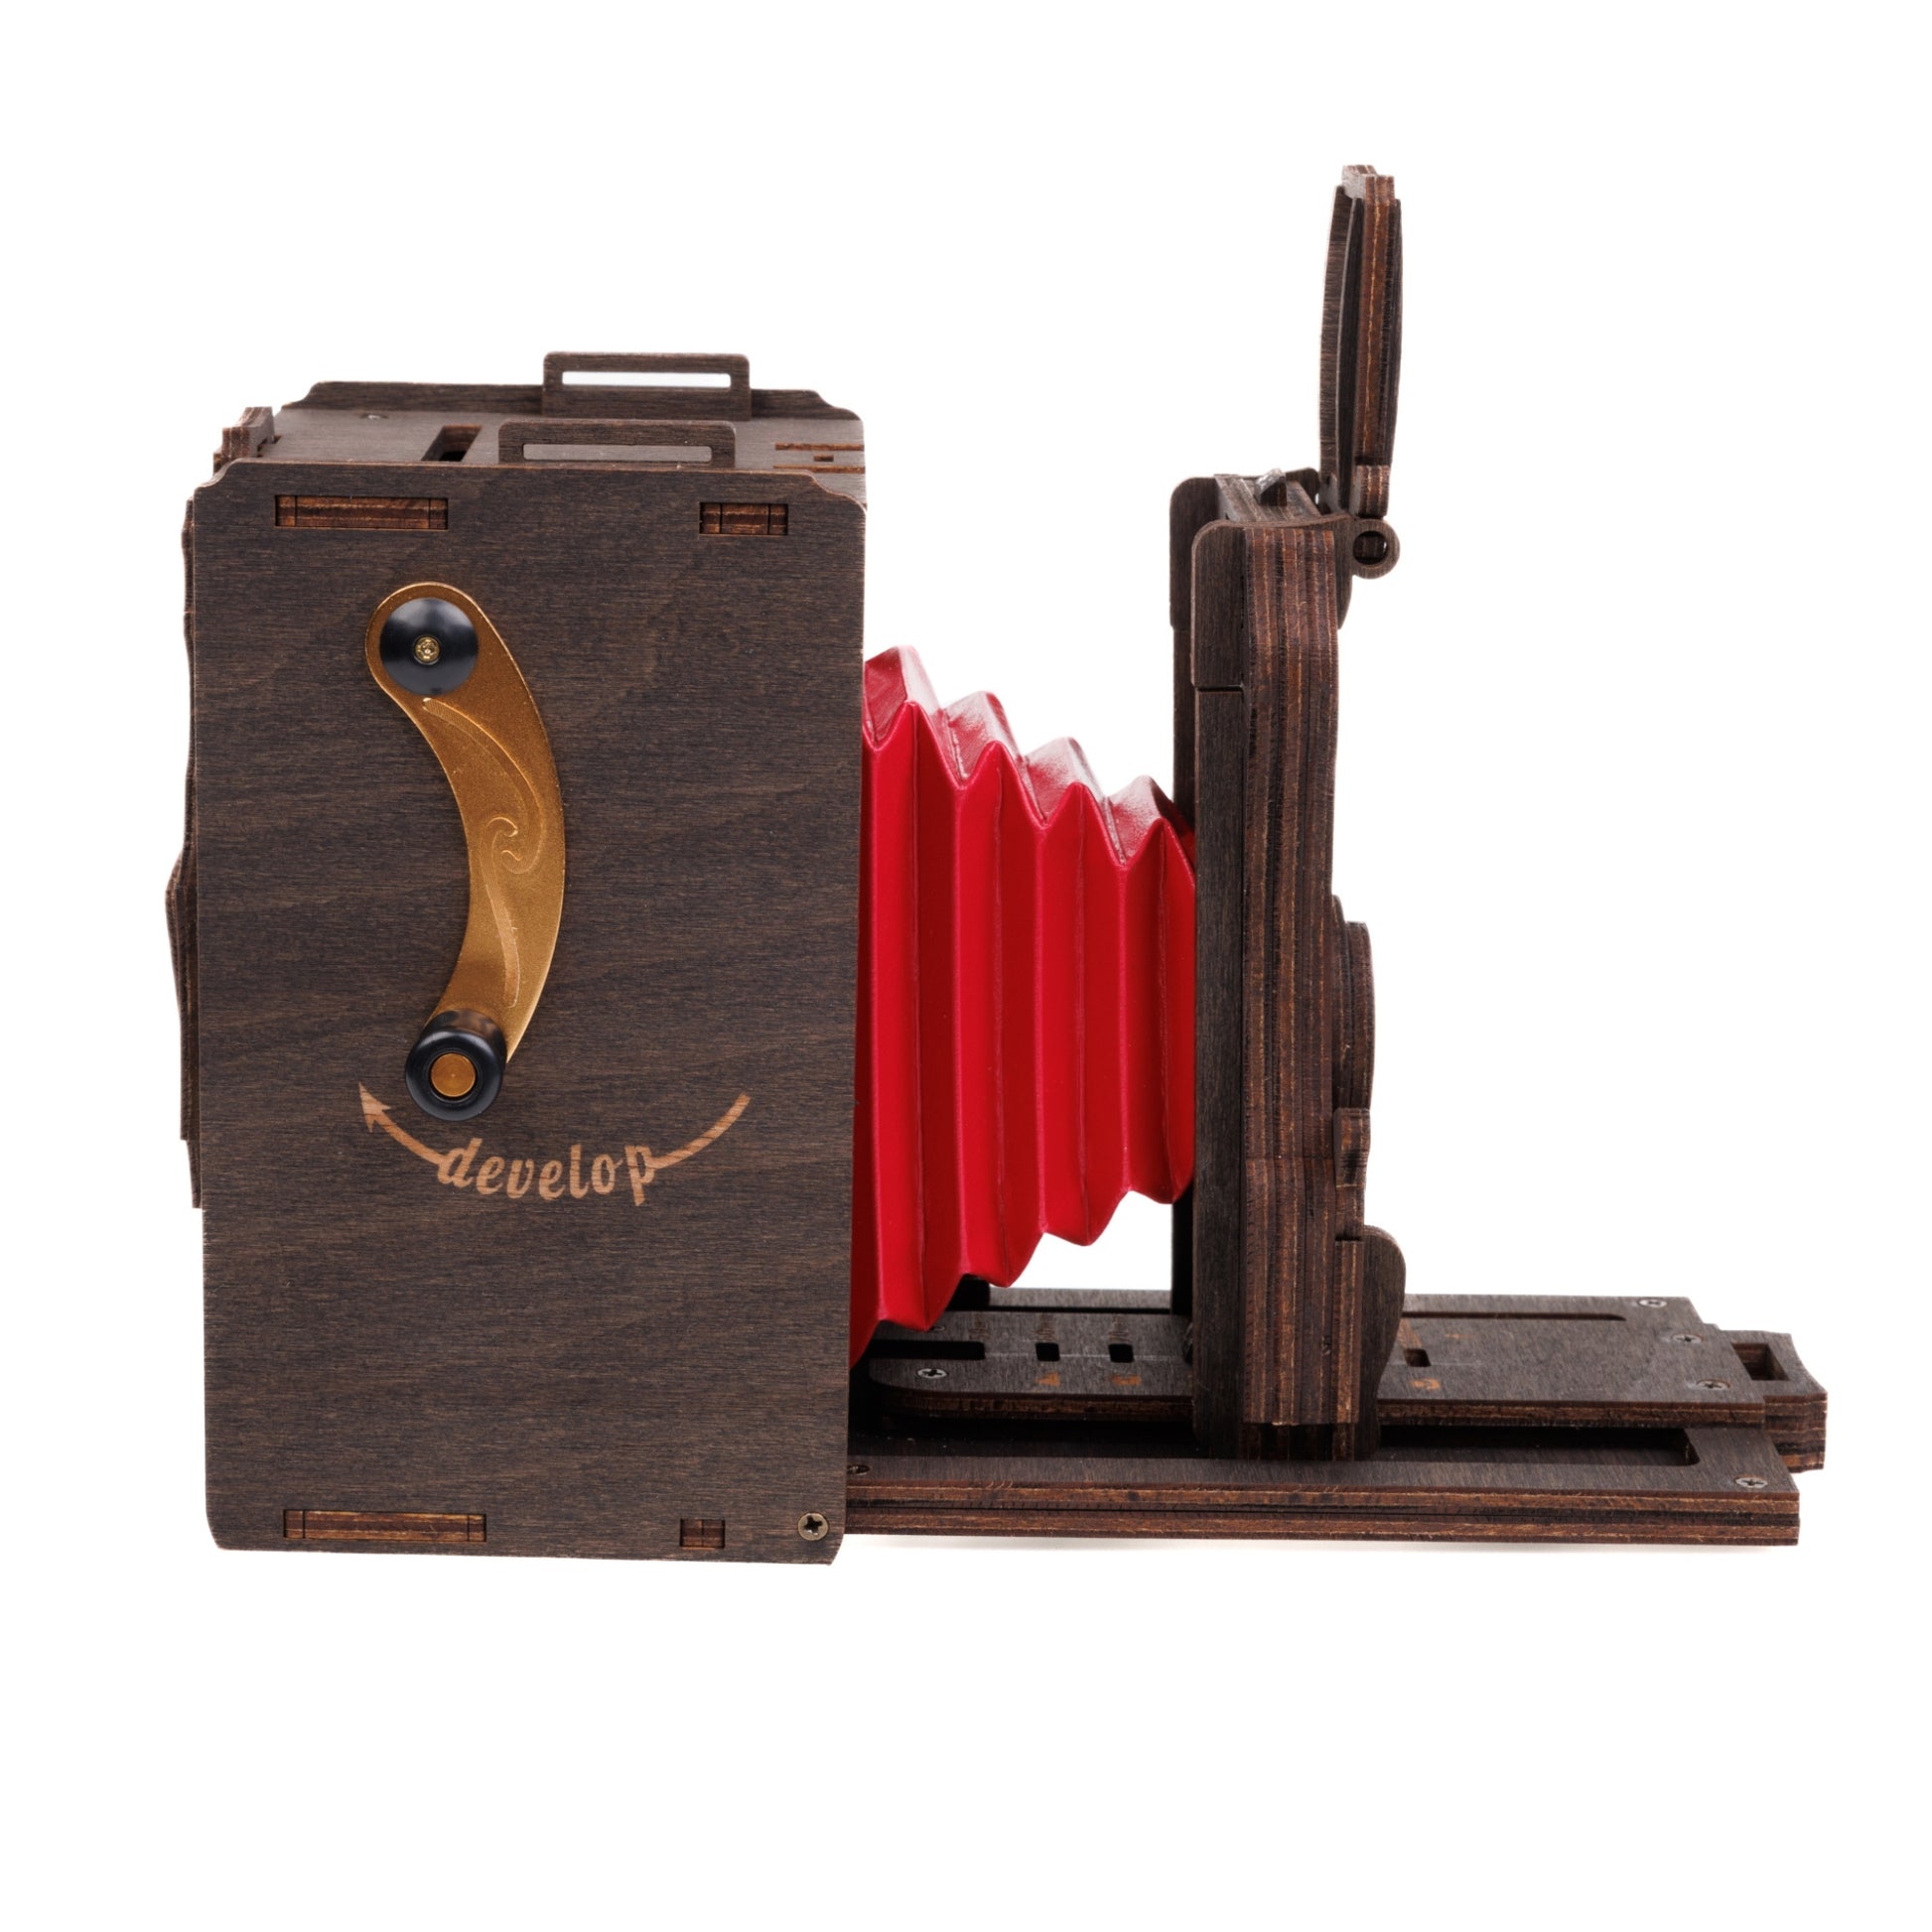 Unfolded Pre-assembled Pinhole Instant Mini Film Camera in Stained Brown color against white background